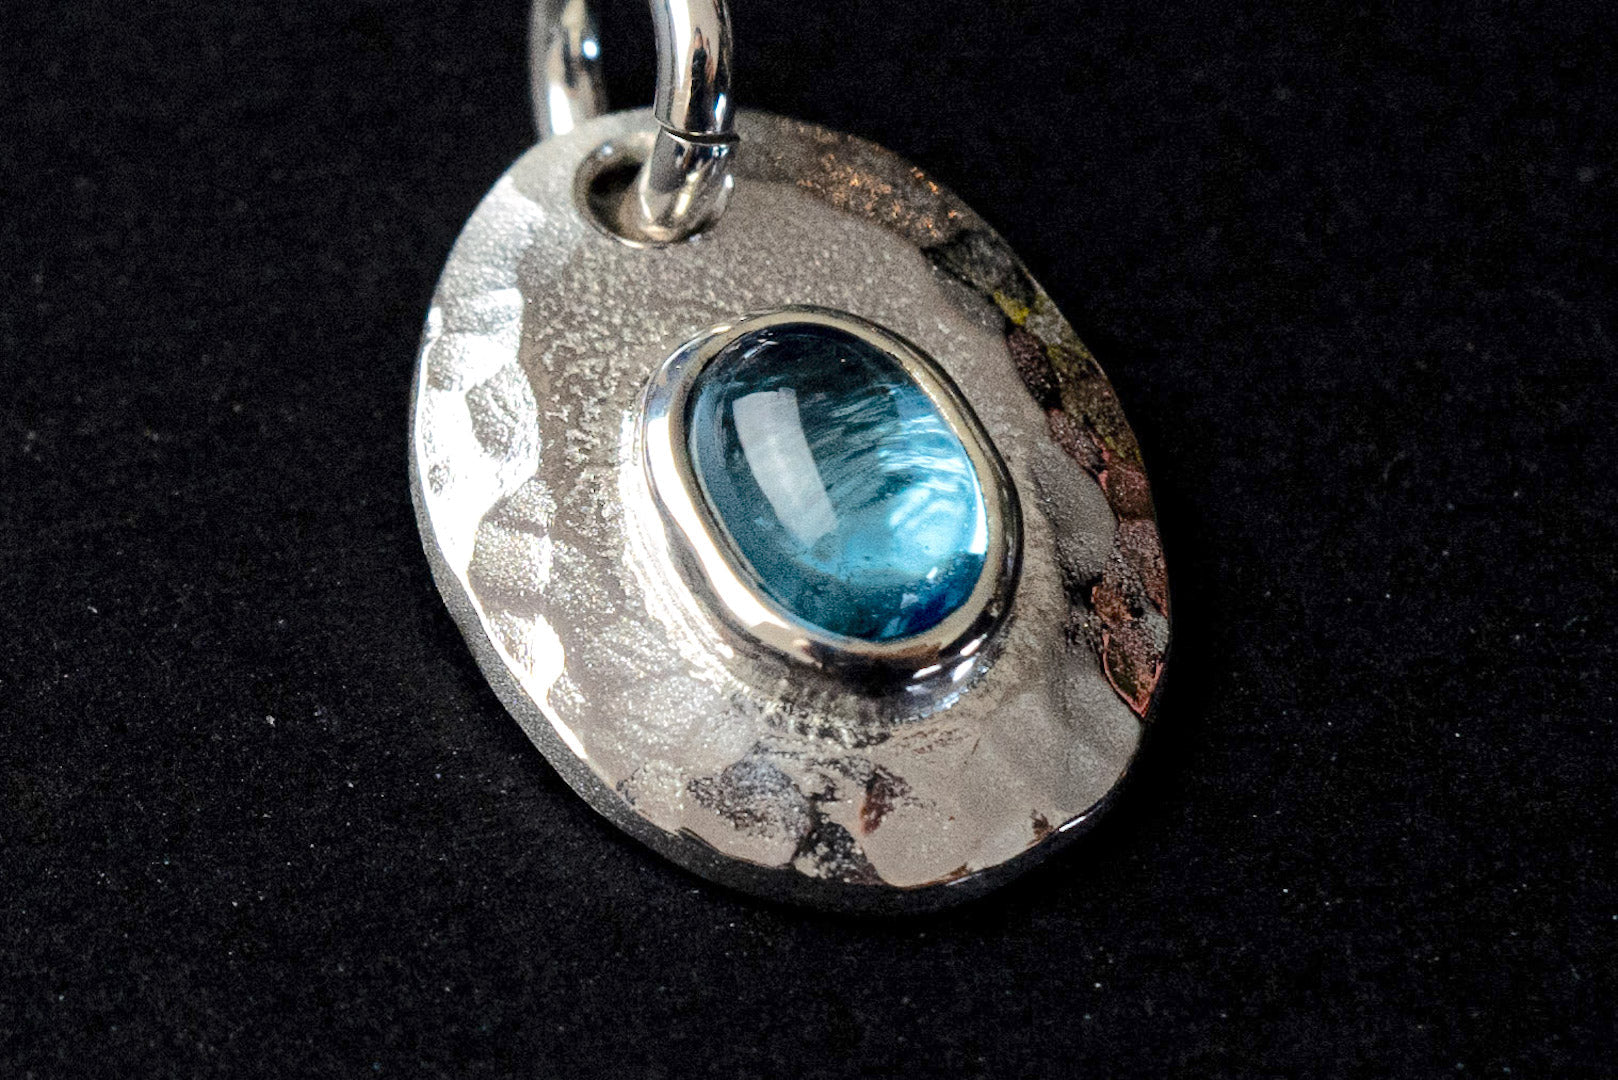 Legend Size Small "Plate" Pendant With Blue Topaz (P-1-BT)